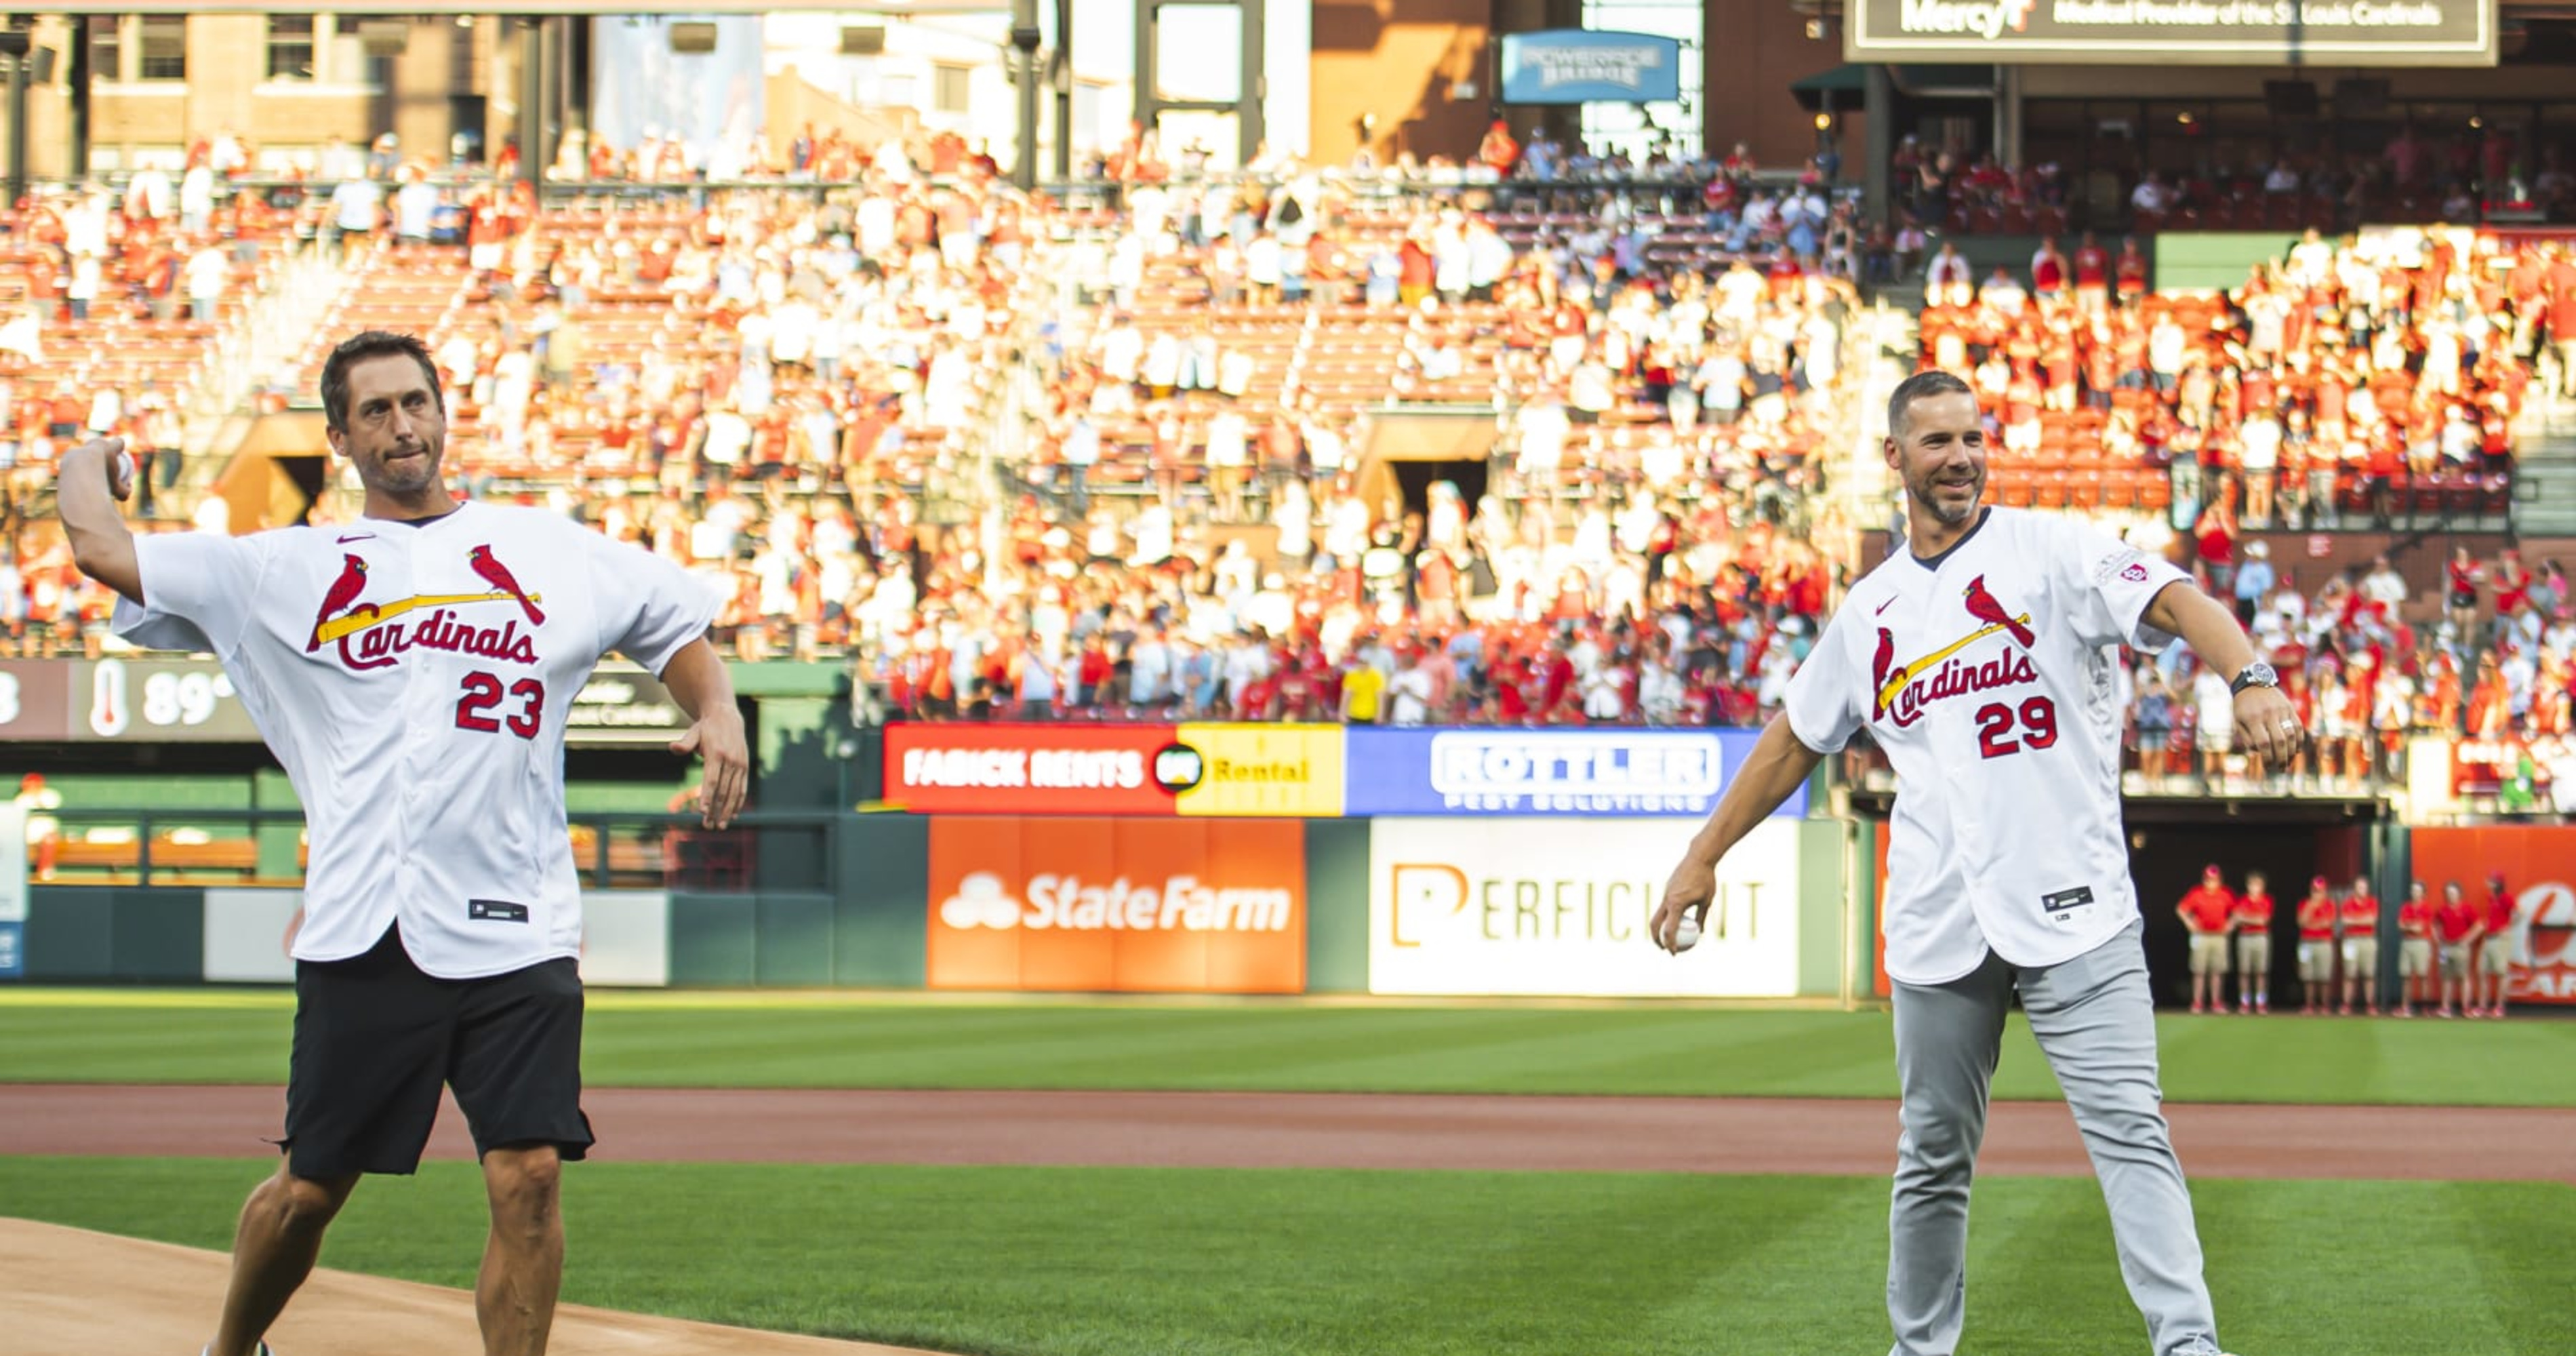 David Freese declines induction into St. Louis Cardinals' Hall of Fame